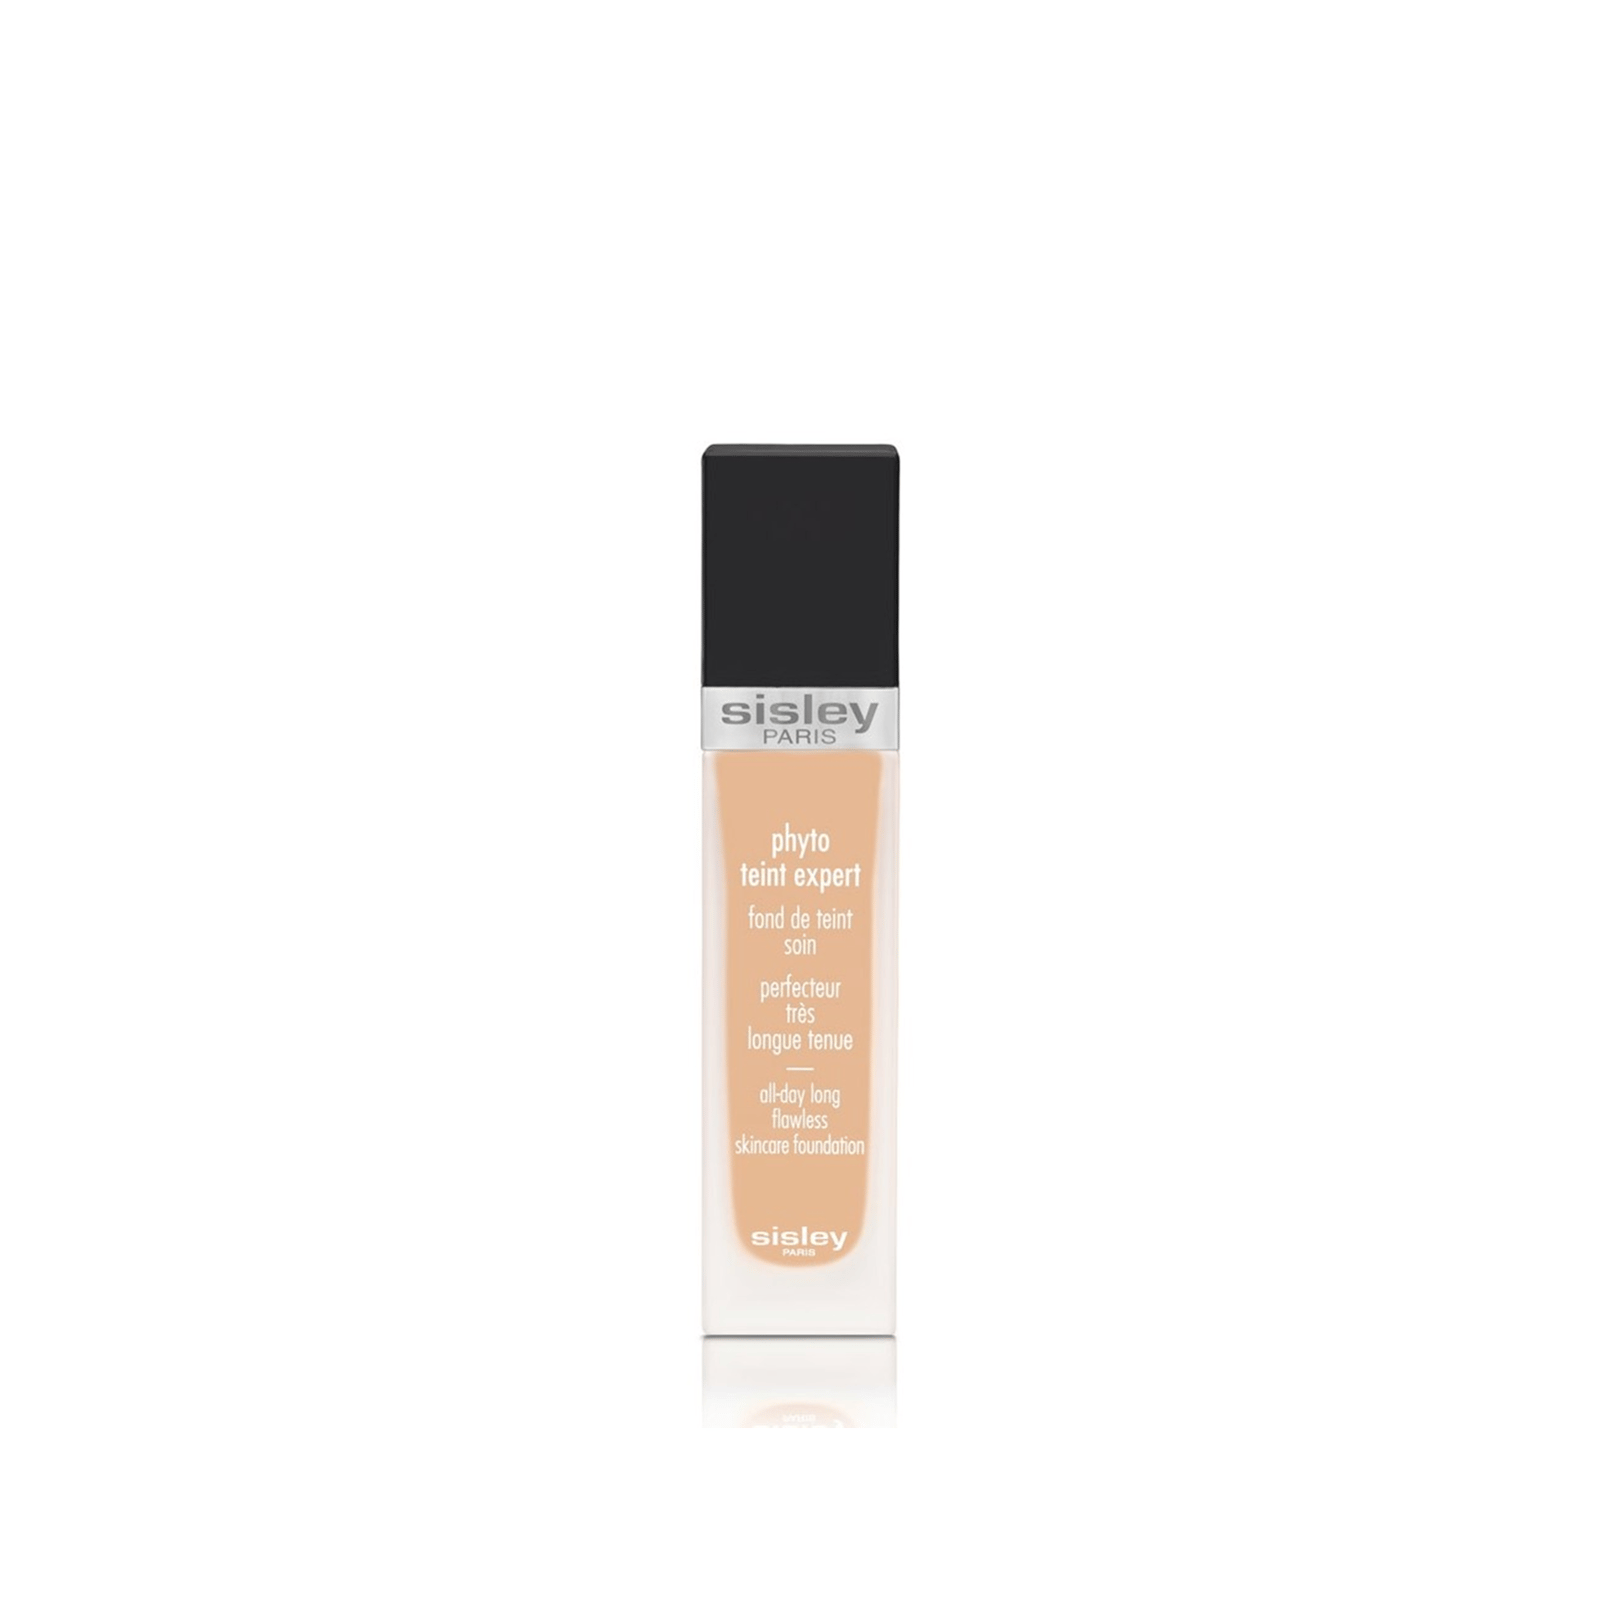 Sisley Paris Phyto Teint Expert All-Day Long Flawless Skincare Foundation 1 Ivory 30ml